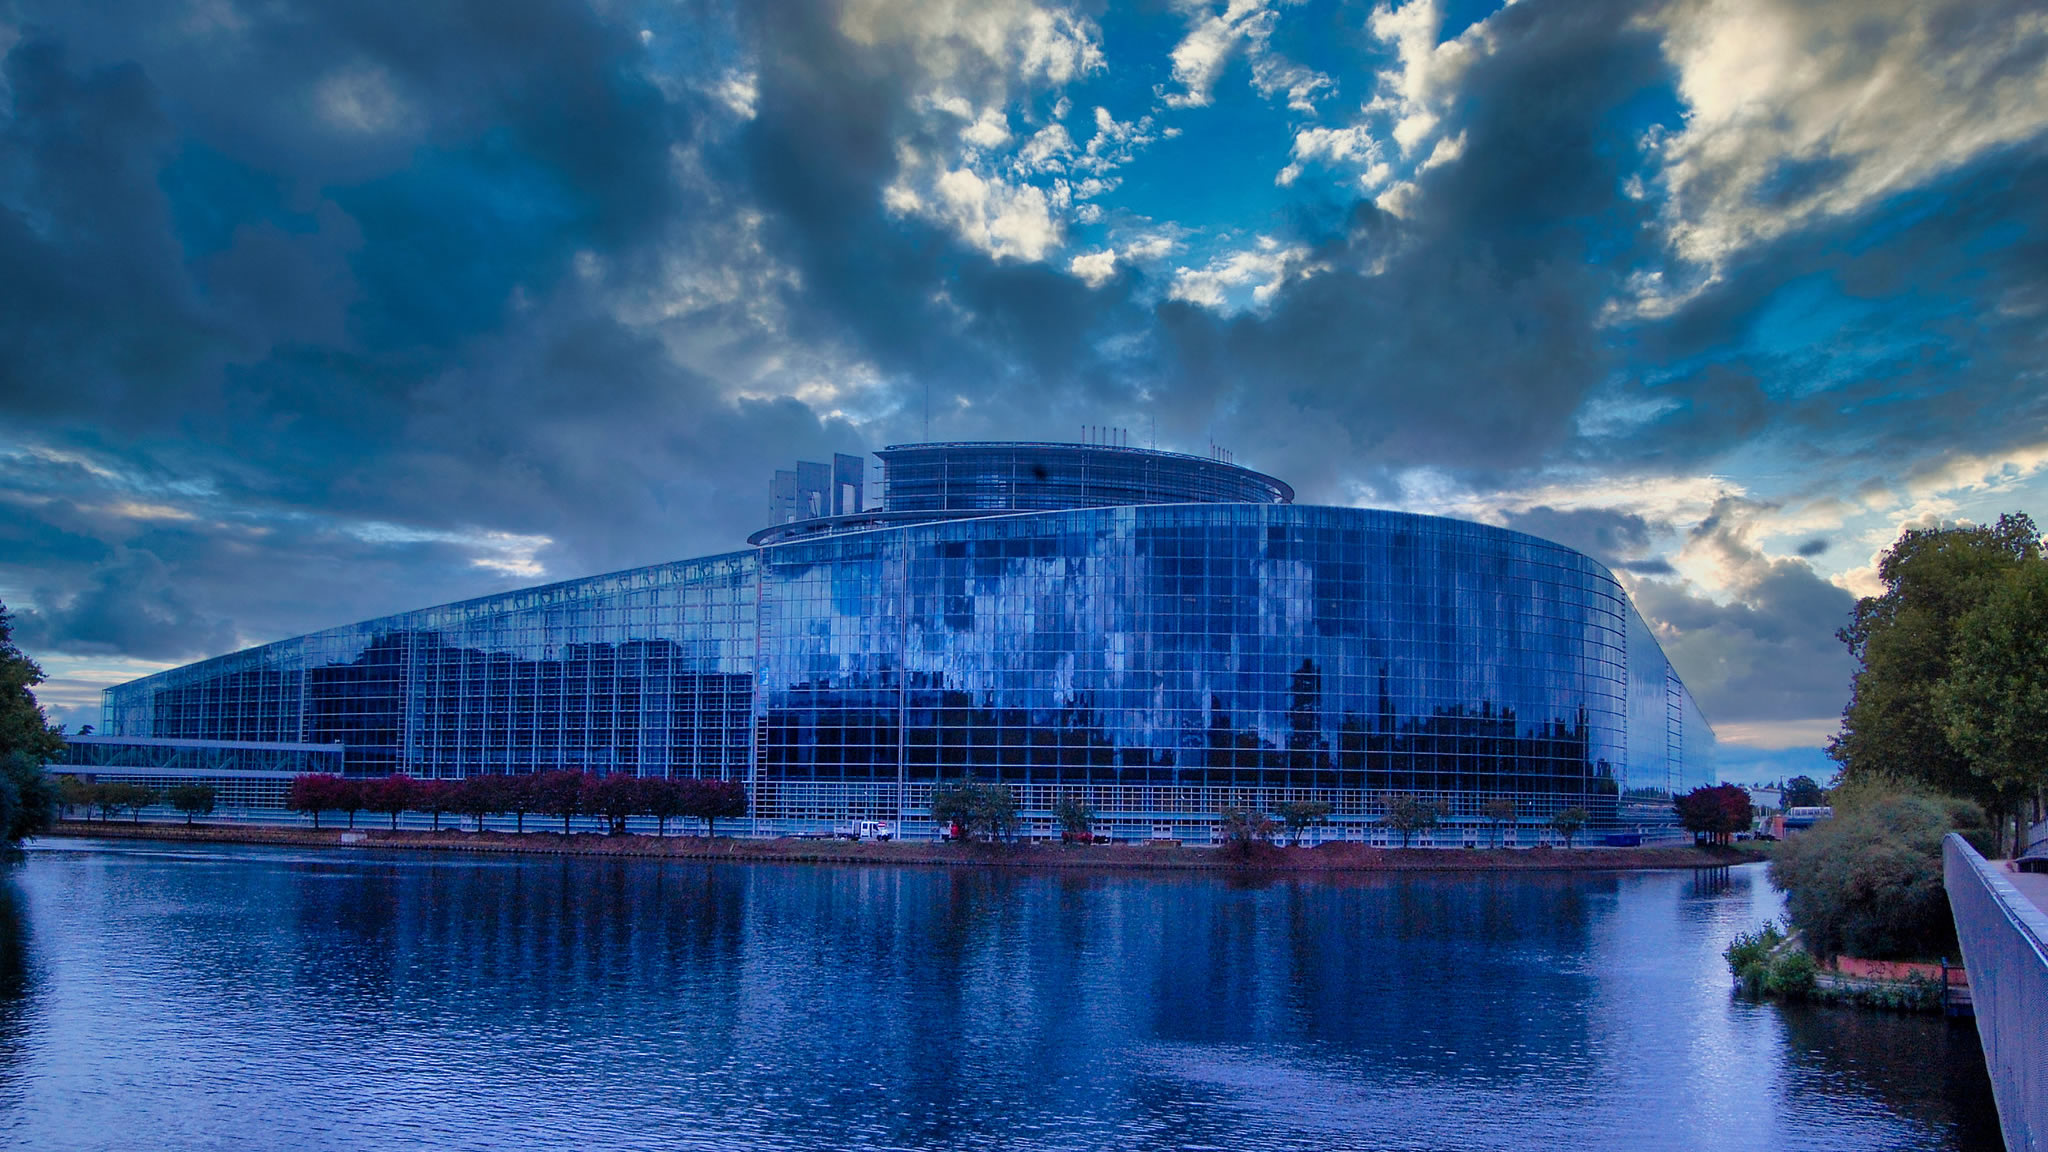 Council of Europe, Strasbourg. Photo: flickr / Drew de F Fawkes